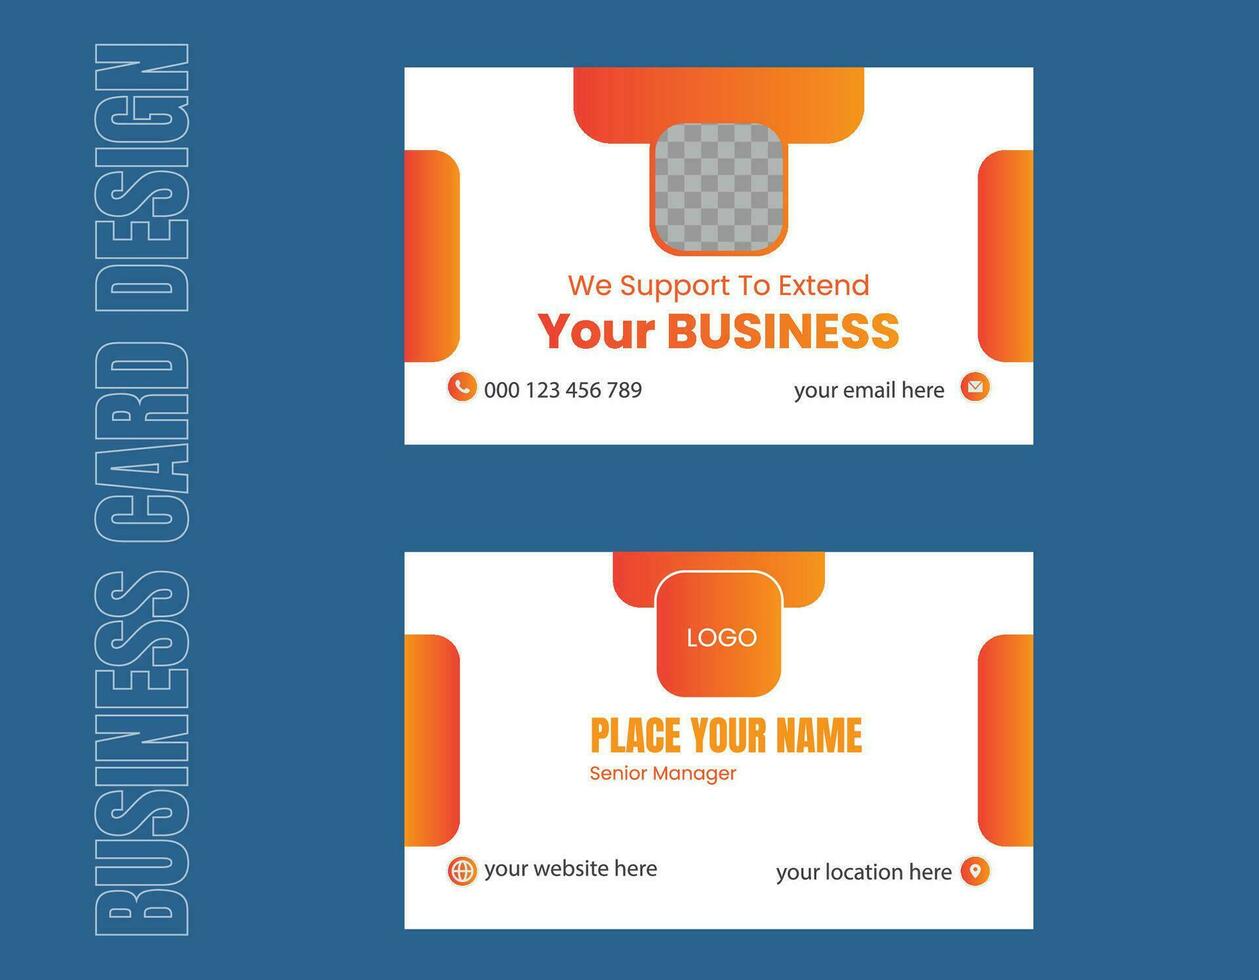 Business card design template, Clean professional business card template, visiting card, business card template. vector